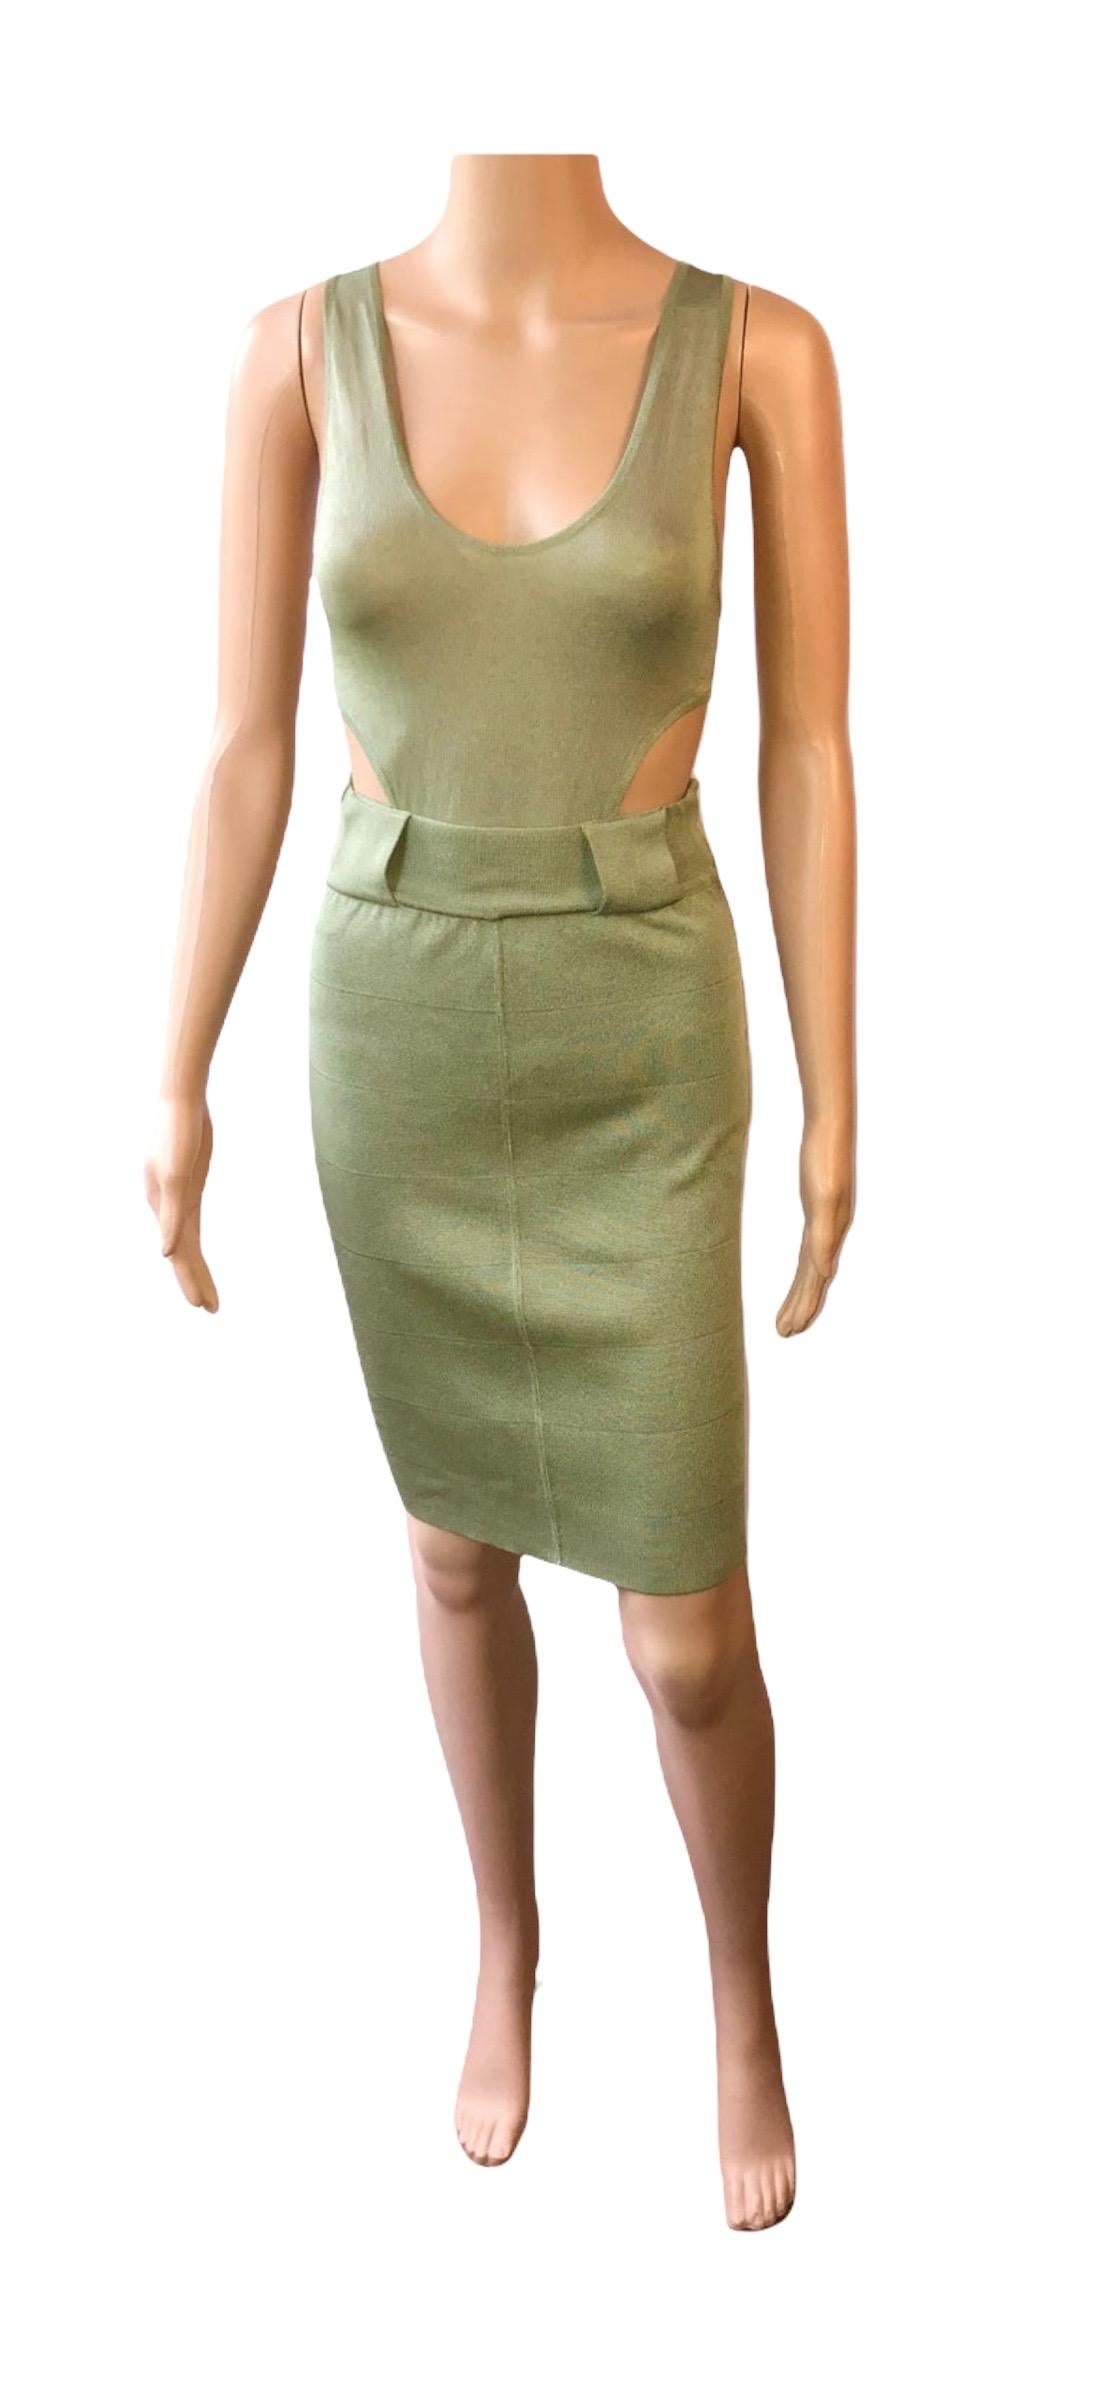 Azzedine Alaia S/S 1985 Vintage Plunged Cutout Bodycon Green Dress For Sale 5